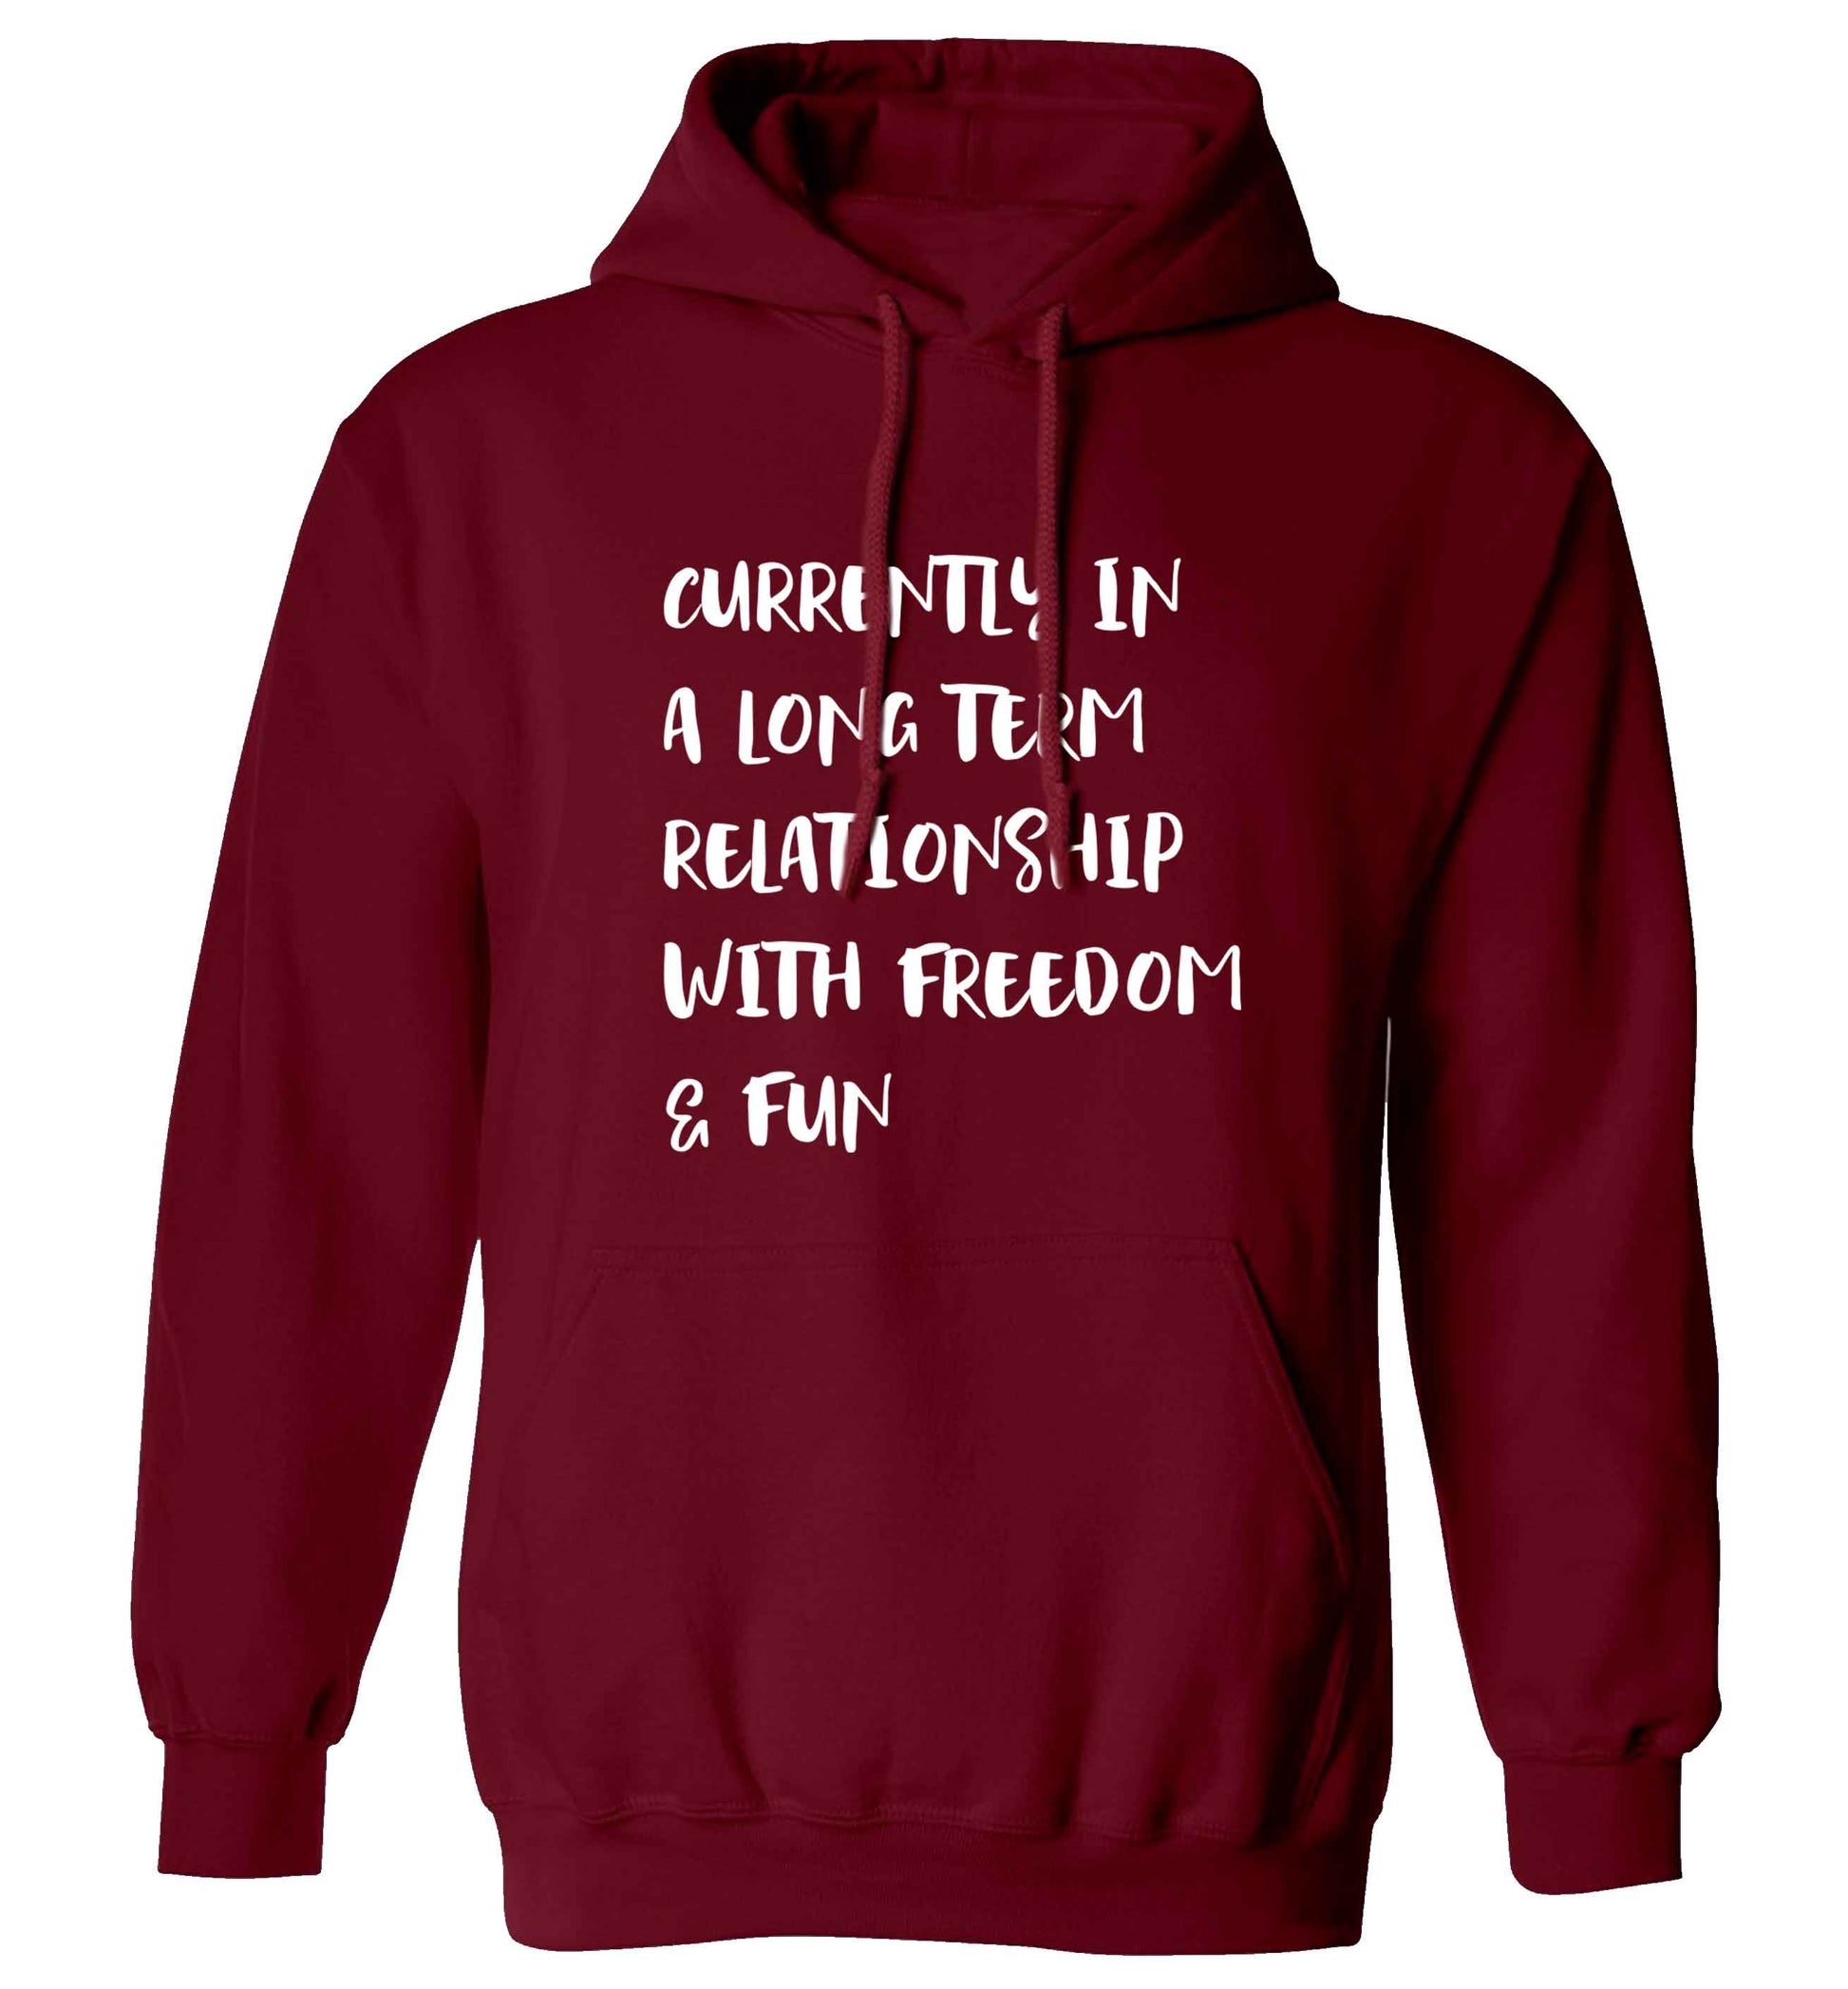 Currently in a long term relationship with freedom and fun adults unisex maroon hoodie 2XL